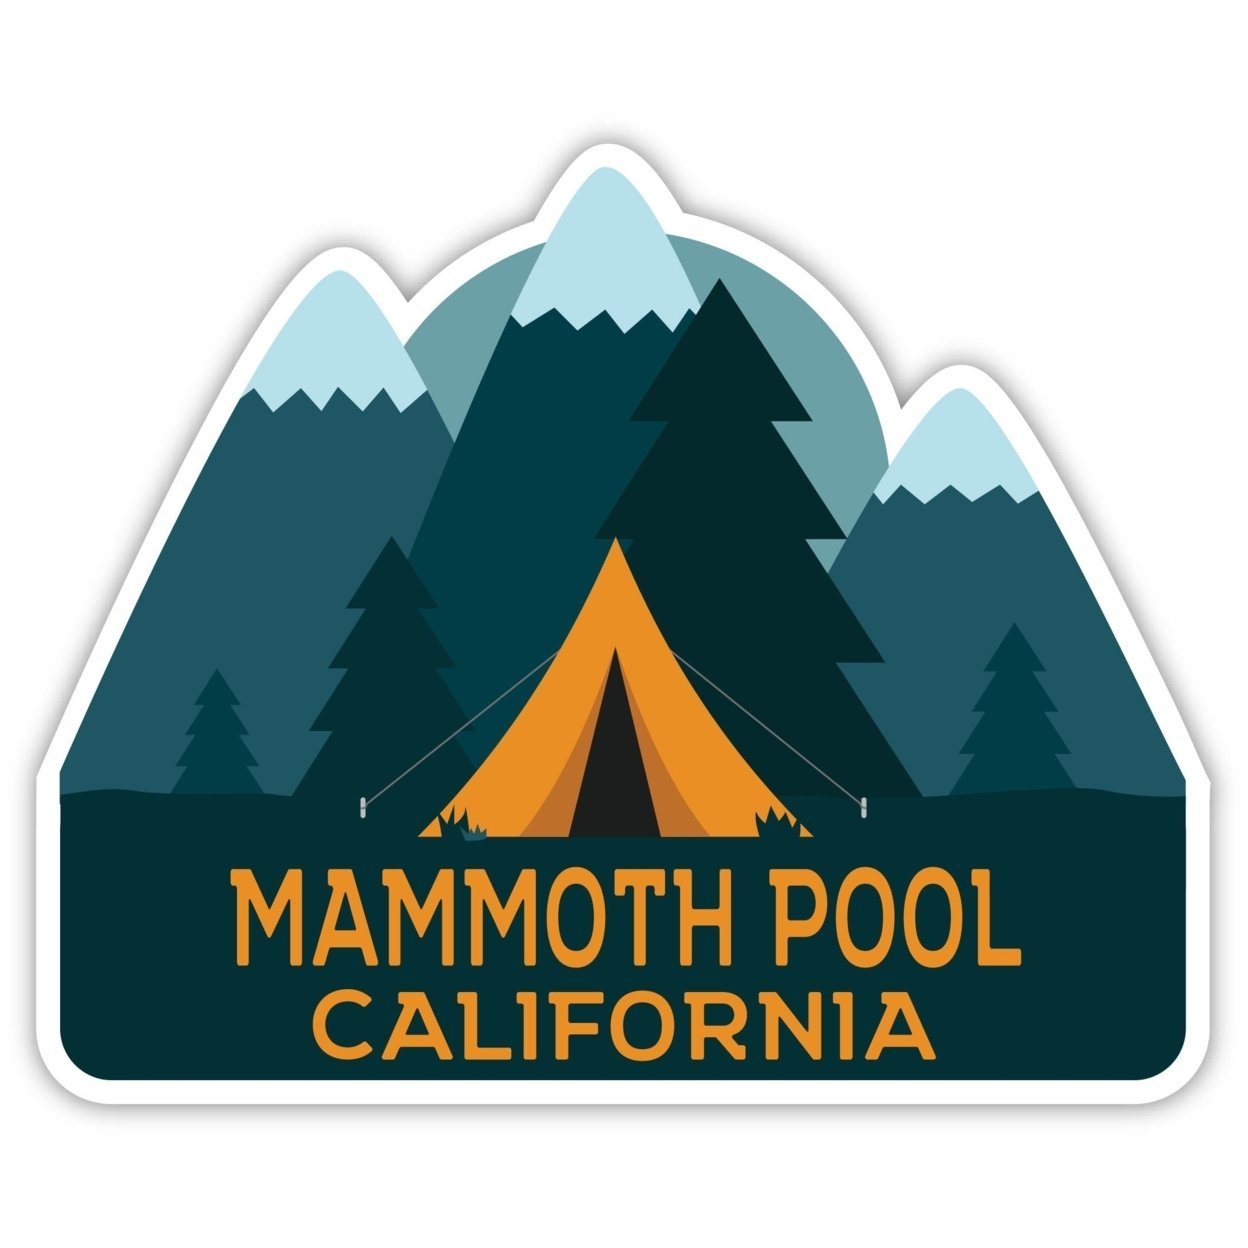 Mammoth Pool California Souvenir Decorative Stickers (Choose Theme And Size) - 2-Inch, Tent